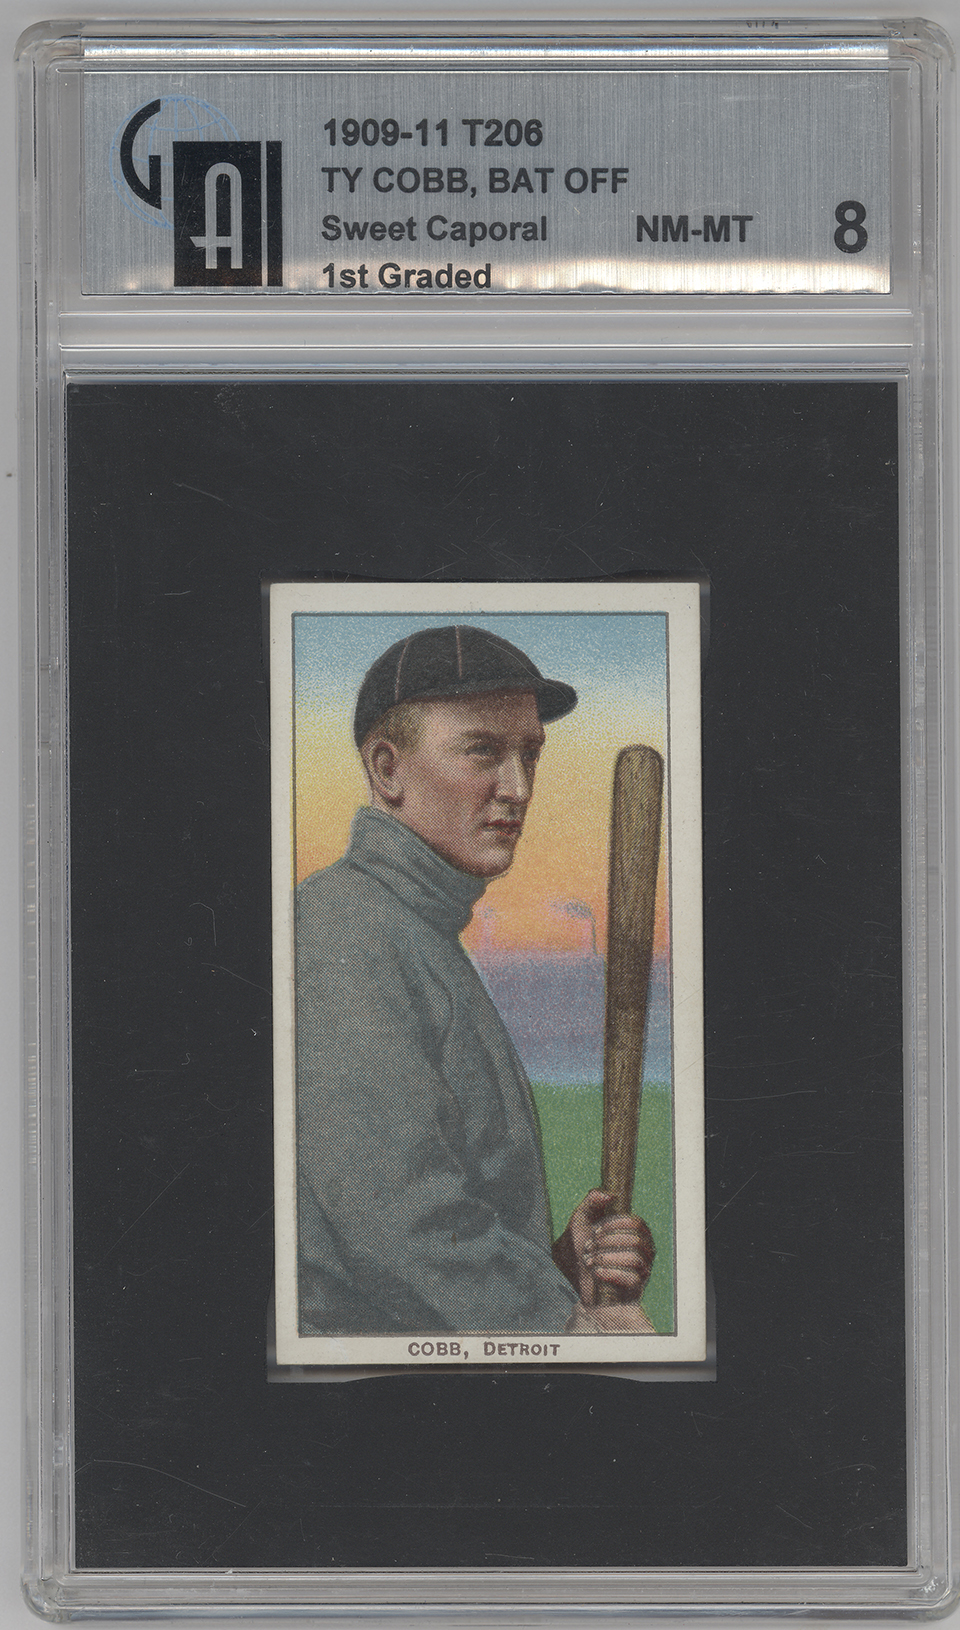 1909-11 T206 Ty Cobb Sweet Caporal Tabaco Card (Bat Off Shoulder)  graded 8